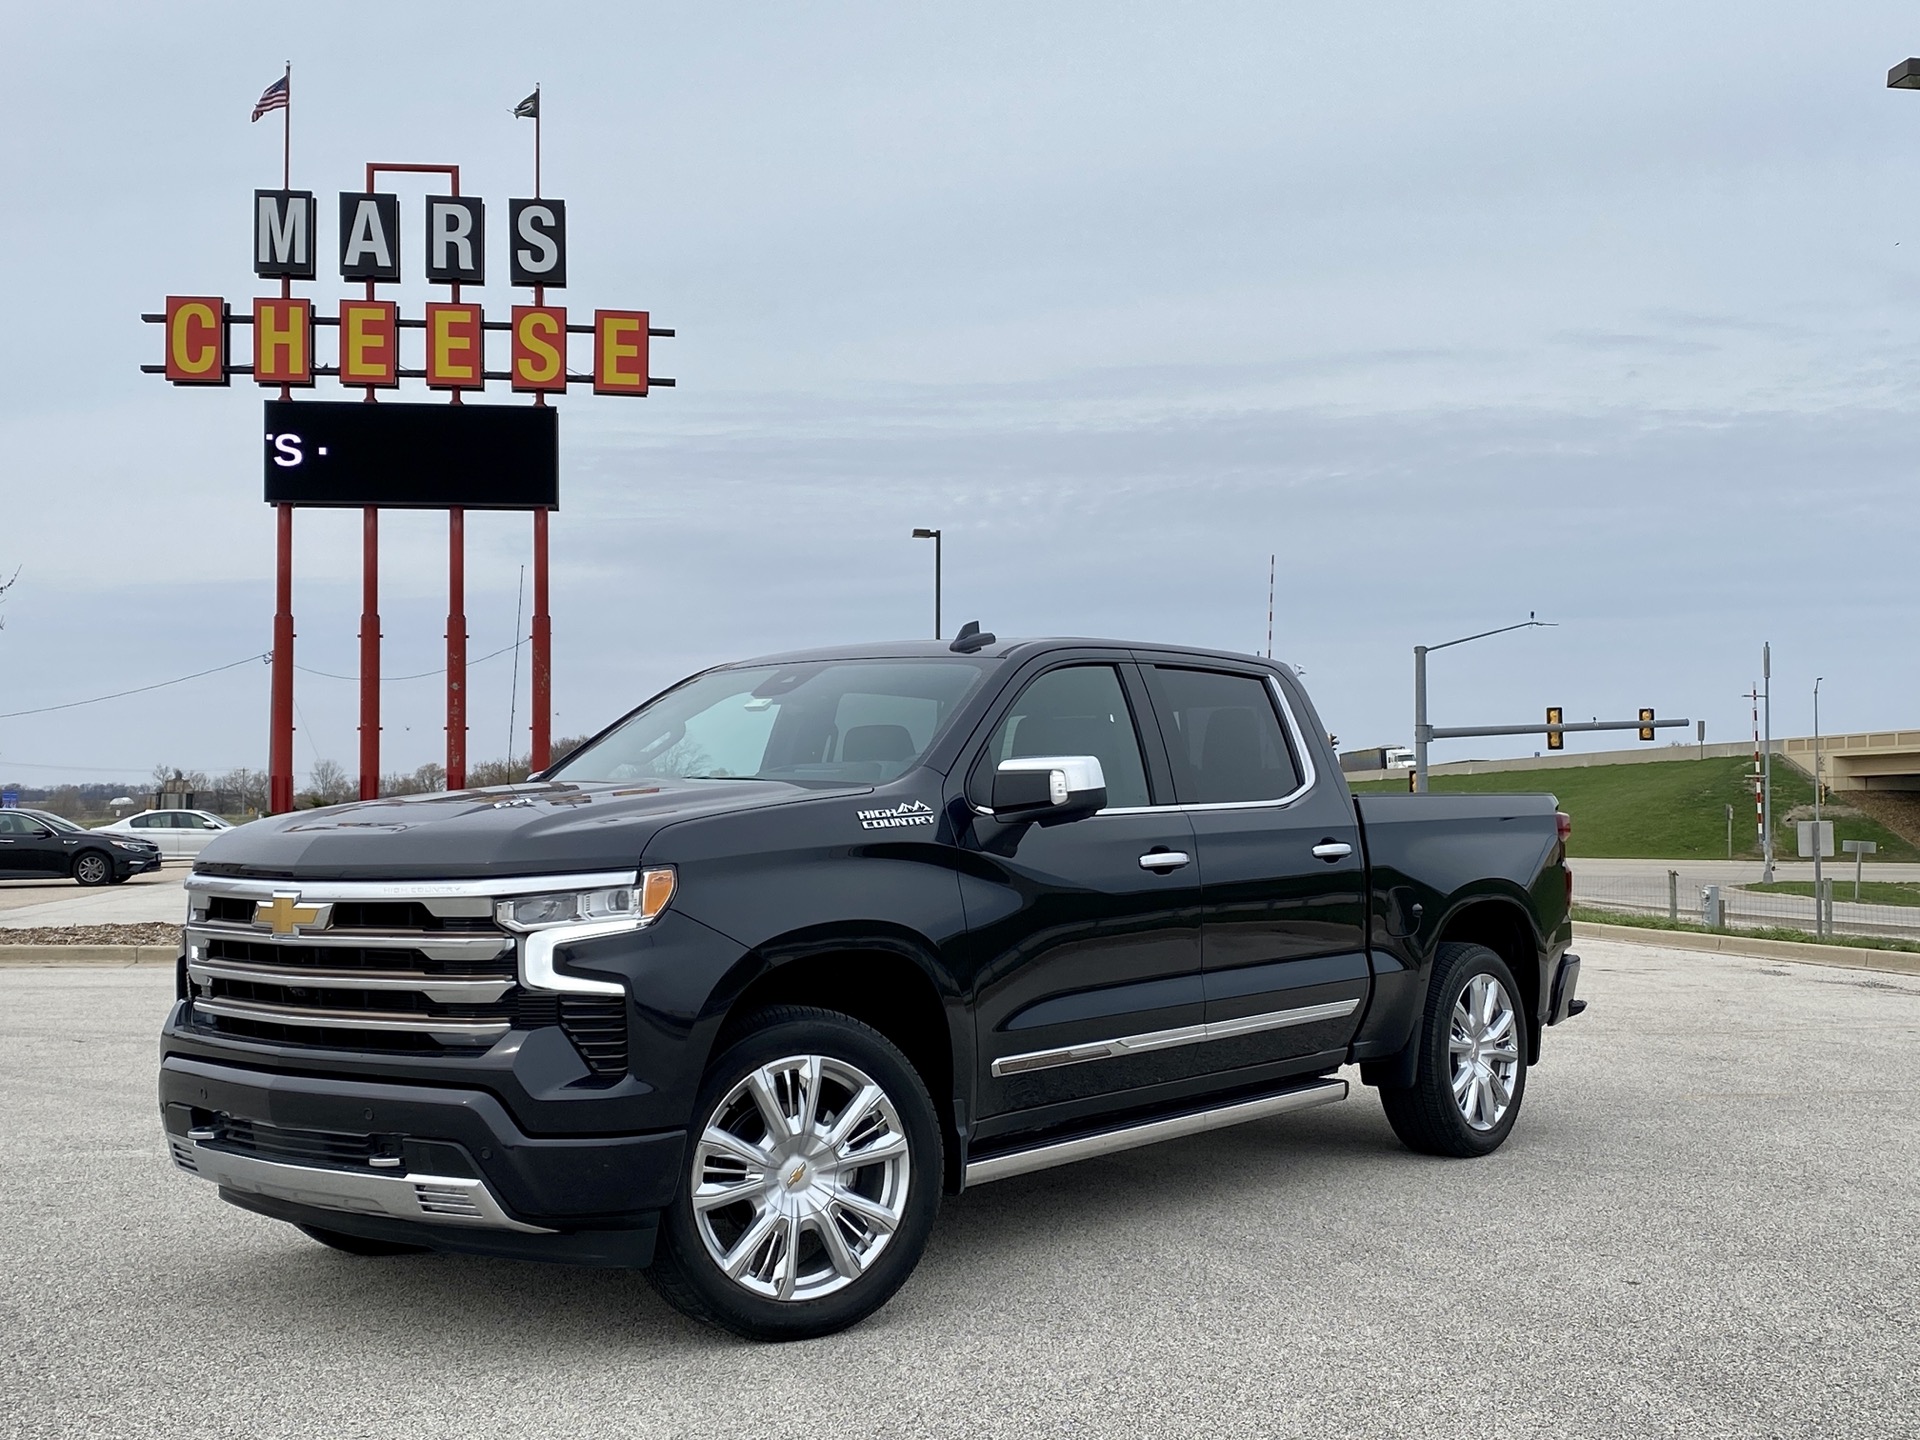 2022 Chevrolet Silverado 1500 (Chevy) Review, Ratings, Specs, Prices, and Photo Car Connection